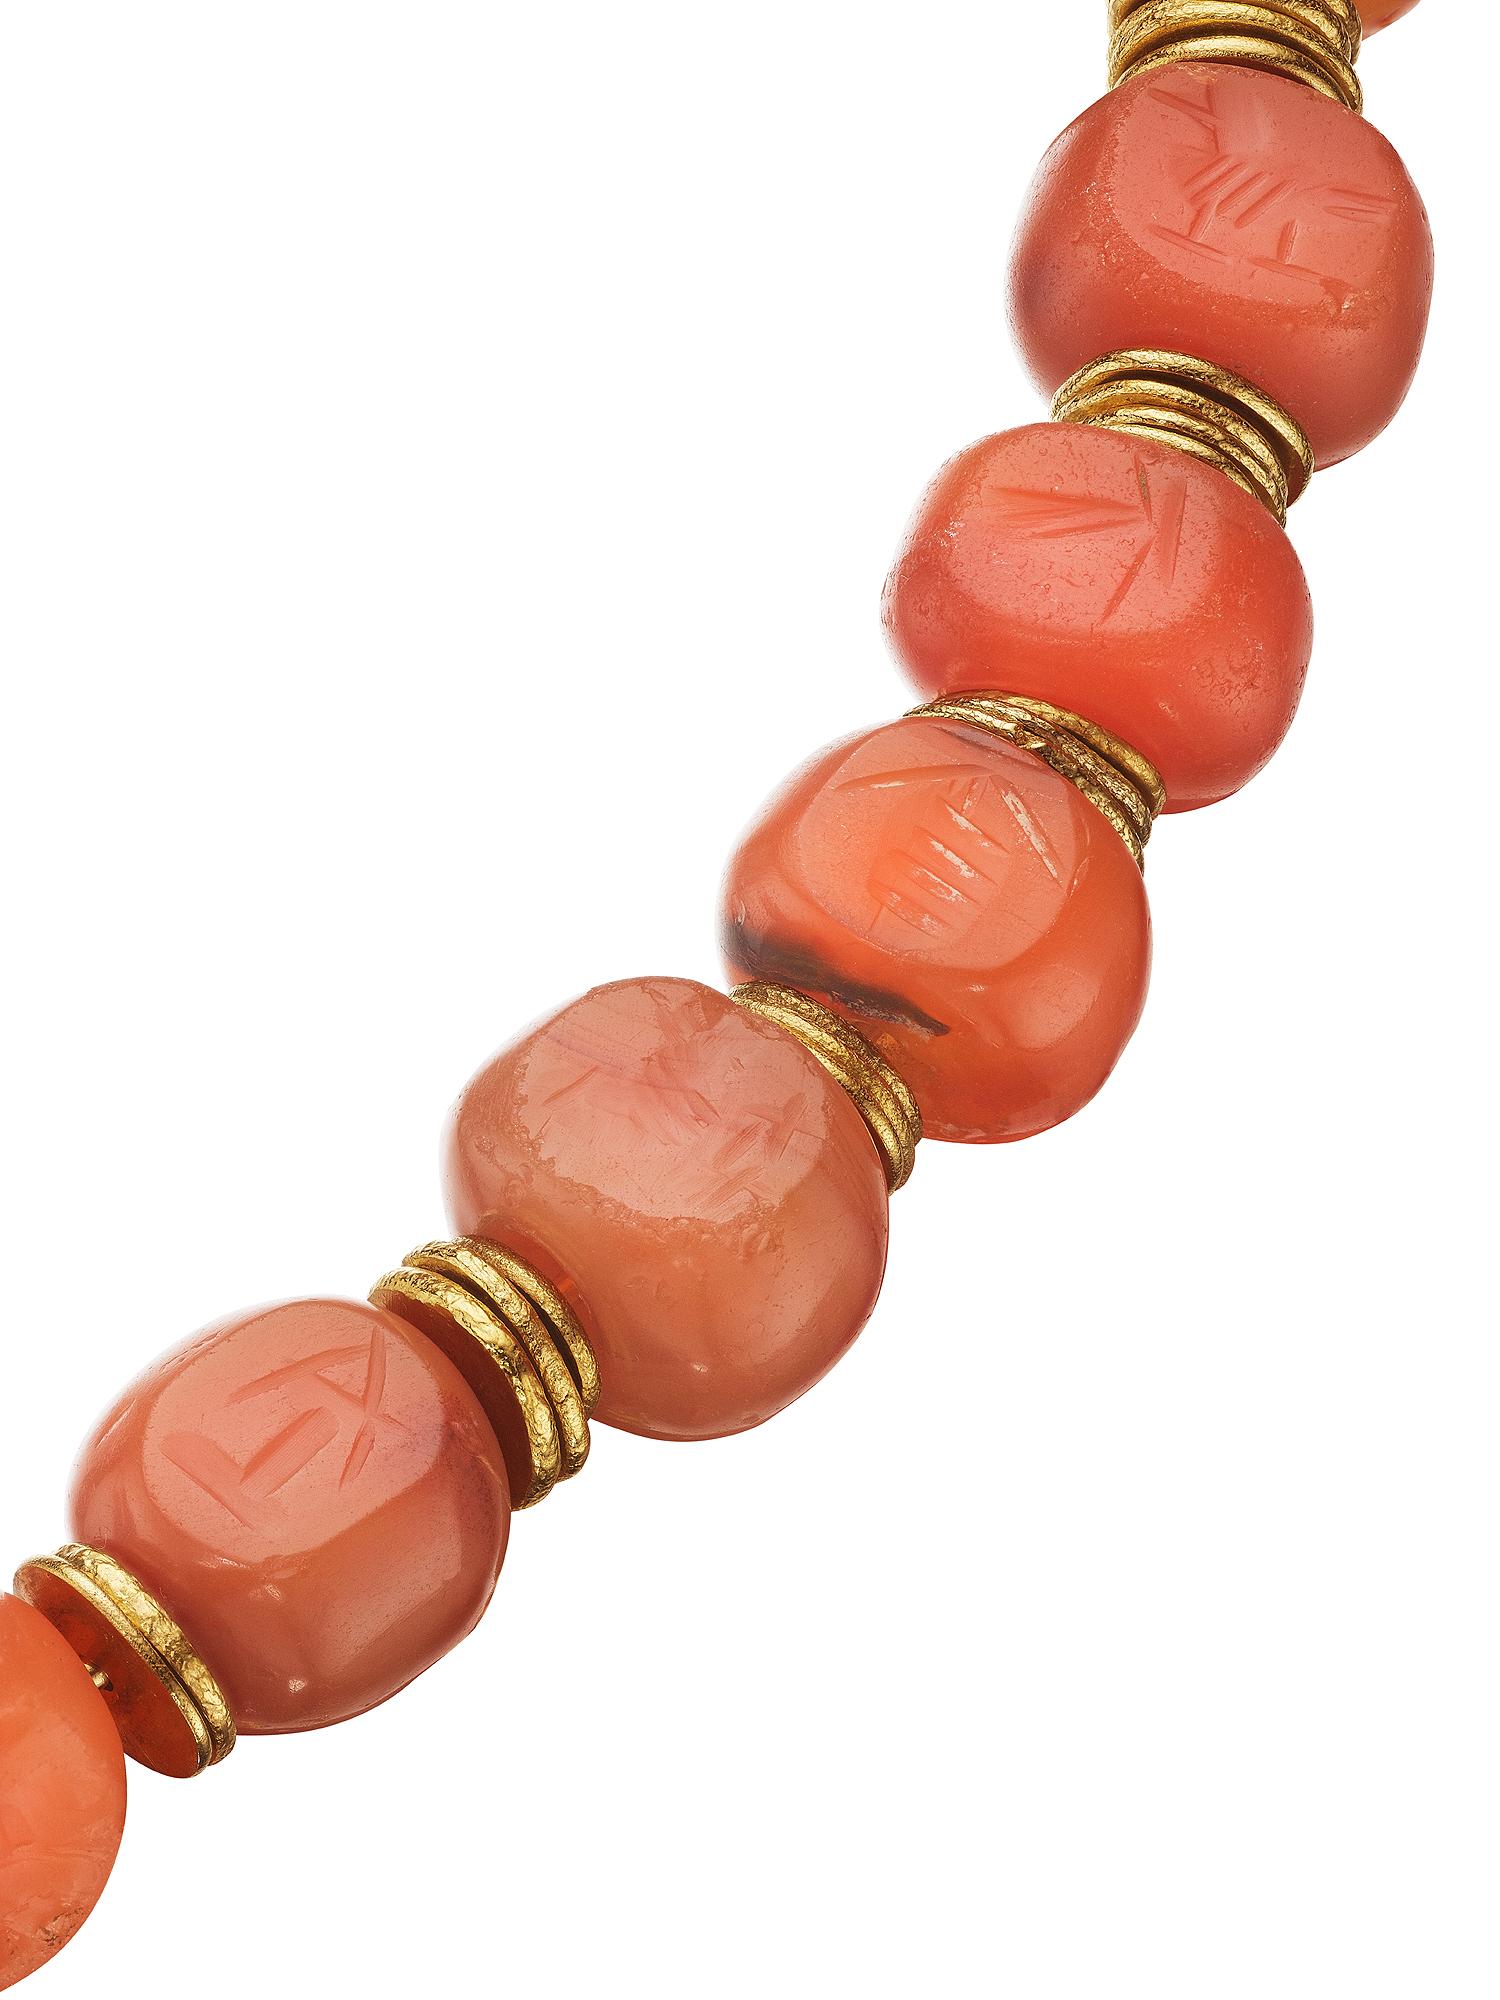 Designed by Jean Mahie using ancient carved earth tone Cornelian beads, circa 200 BC-500 AD, and 22 karat gold accents, this vintage choker necklace has both a timeless and modern vibe.  With 25 Mesopotamia beads carved with seals representing a